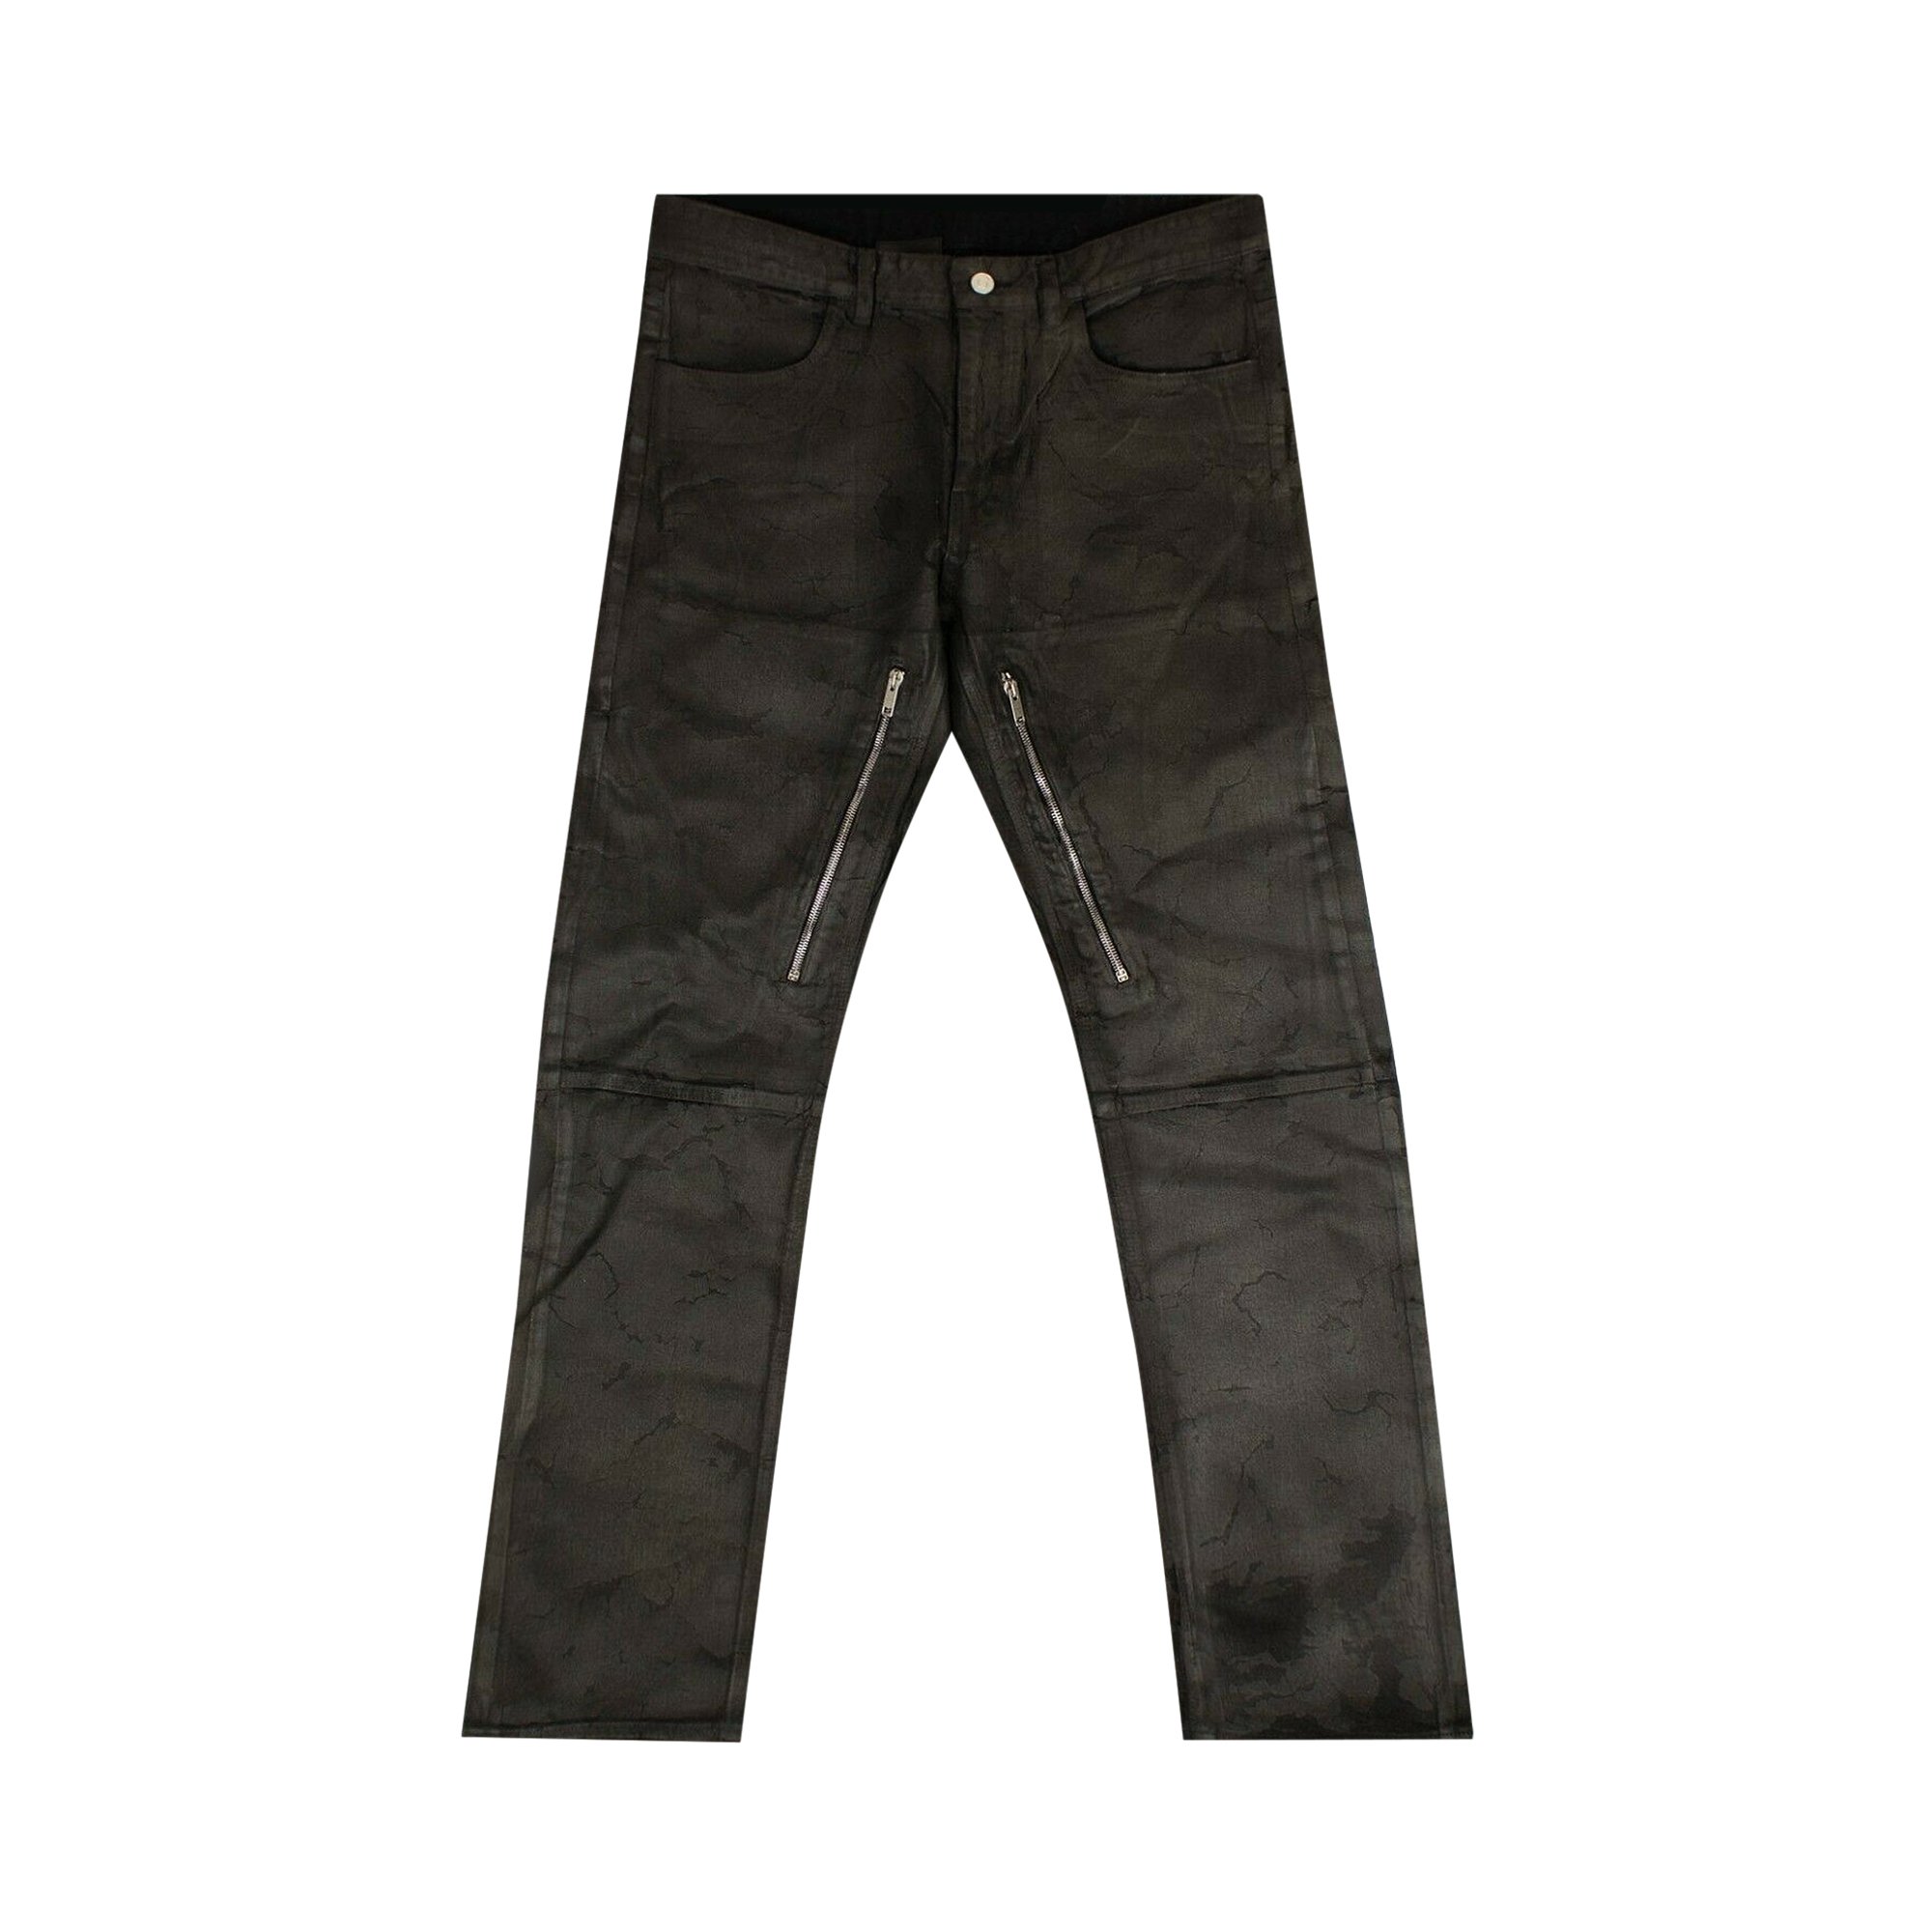 Buy Givenchy Painted Crackled Jeans 'Black' - BM50SU50M6 001 | GOAT